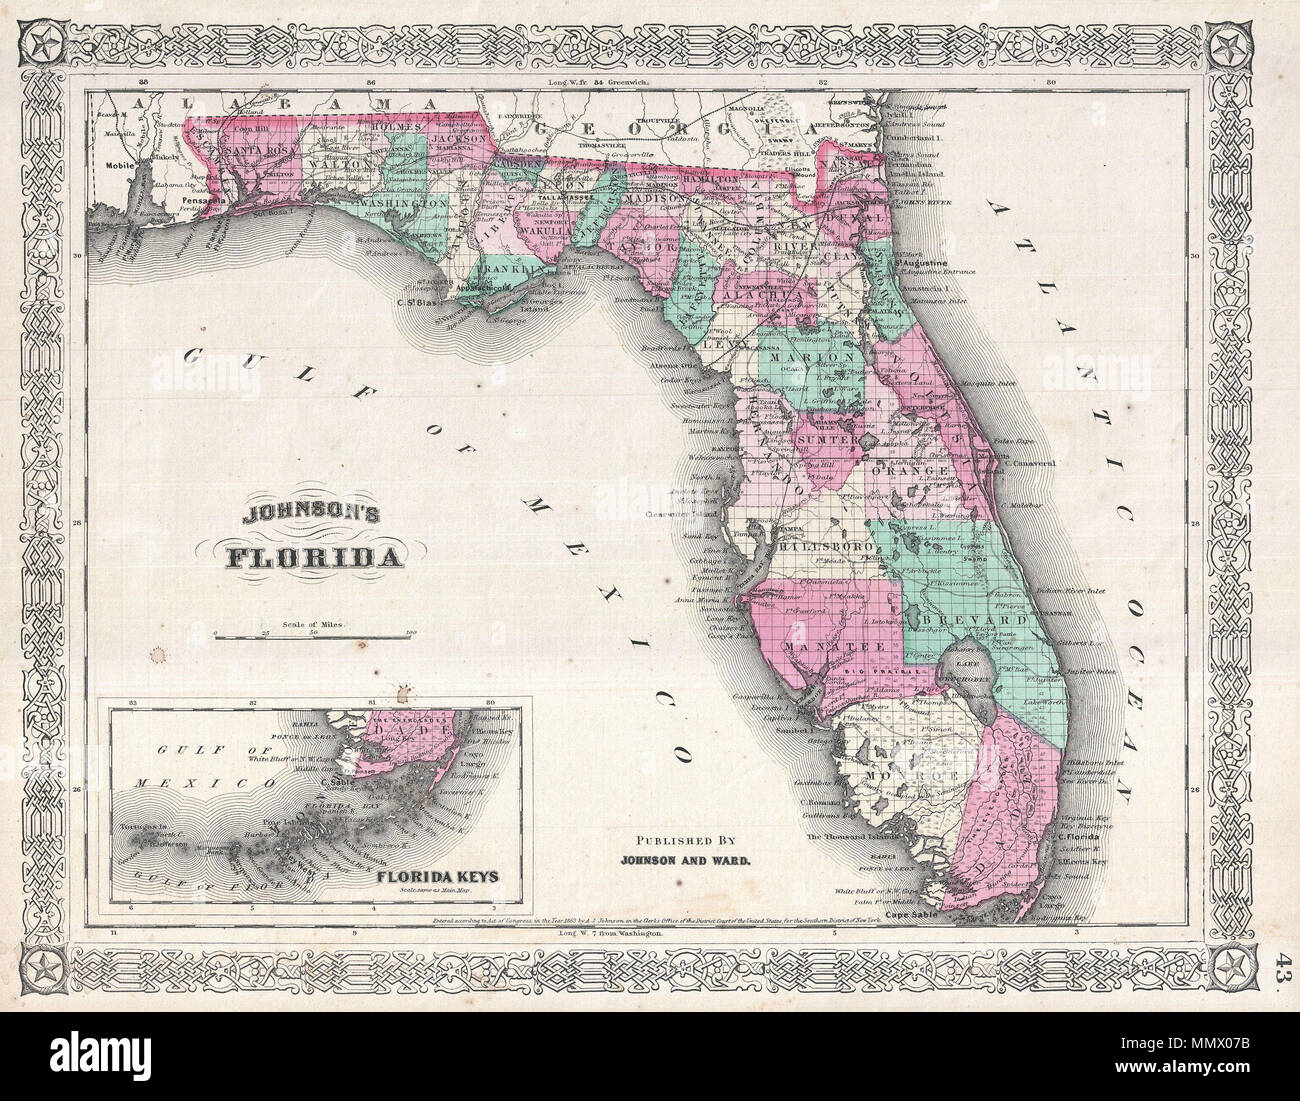 .  English: A beautiful example of A. J. Johnson’s 1866 map of Florida. This rare map offers a fascinating snapshot of this secessionist state shortly following the close of the American Civil War. Map shows the state in full with color coding according to county. Cartographically this map is probably based on U.S. Land Survey charts commissioned in the mid-1850s. Makes numerous references to American Indian tribes and to forts and battles sites related to the Seminole Wars. Notes Lake Okeechobee, the Everglades, the Indian Hunting Grounds, Biscayne Bay, Tampa Bay and the Okefenokee Swamp. Als Stock Photo